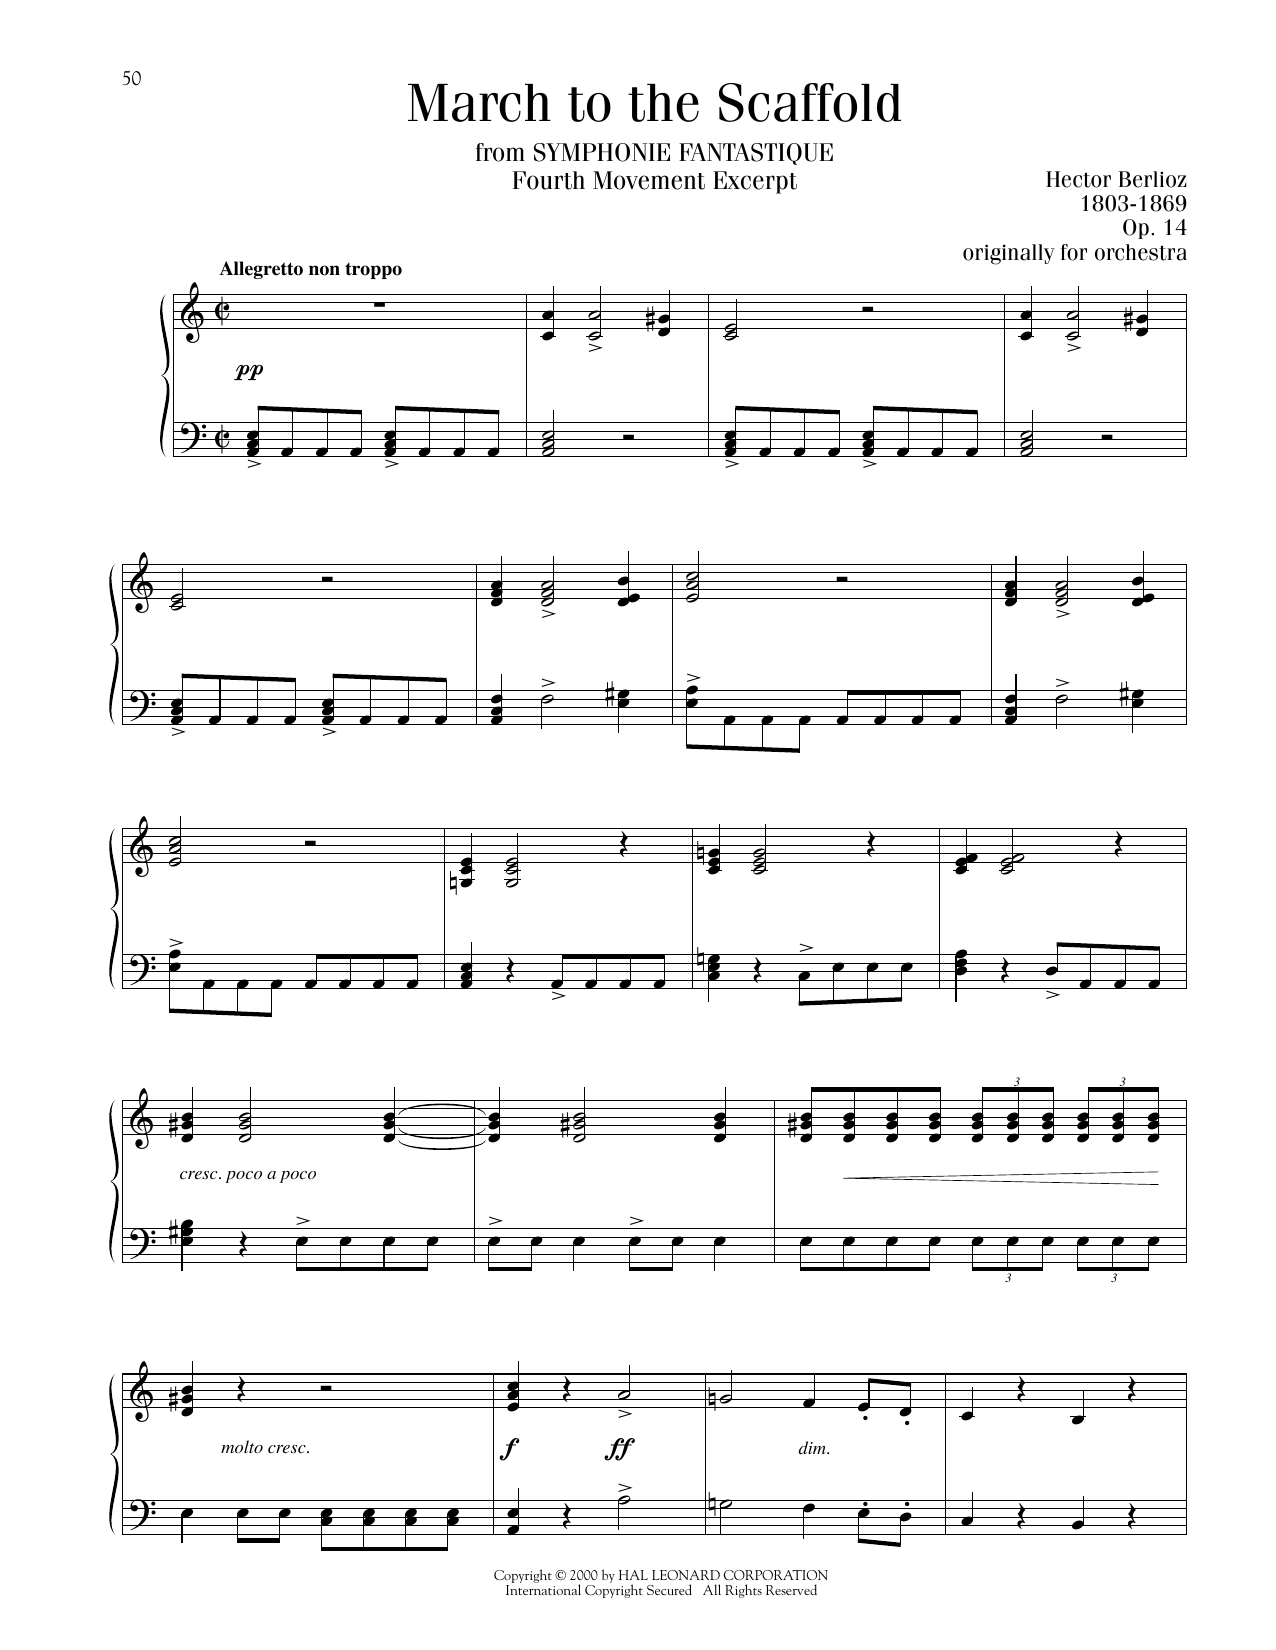 Hector Berlioz March To The Scaffold sheet music notes printable PDF score